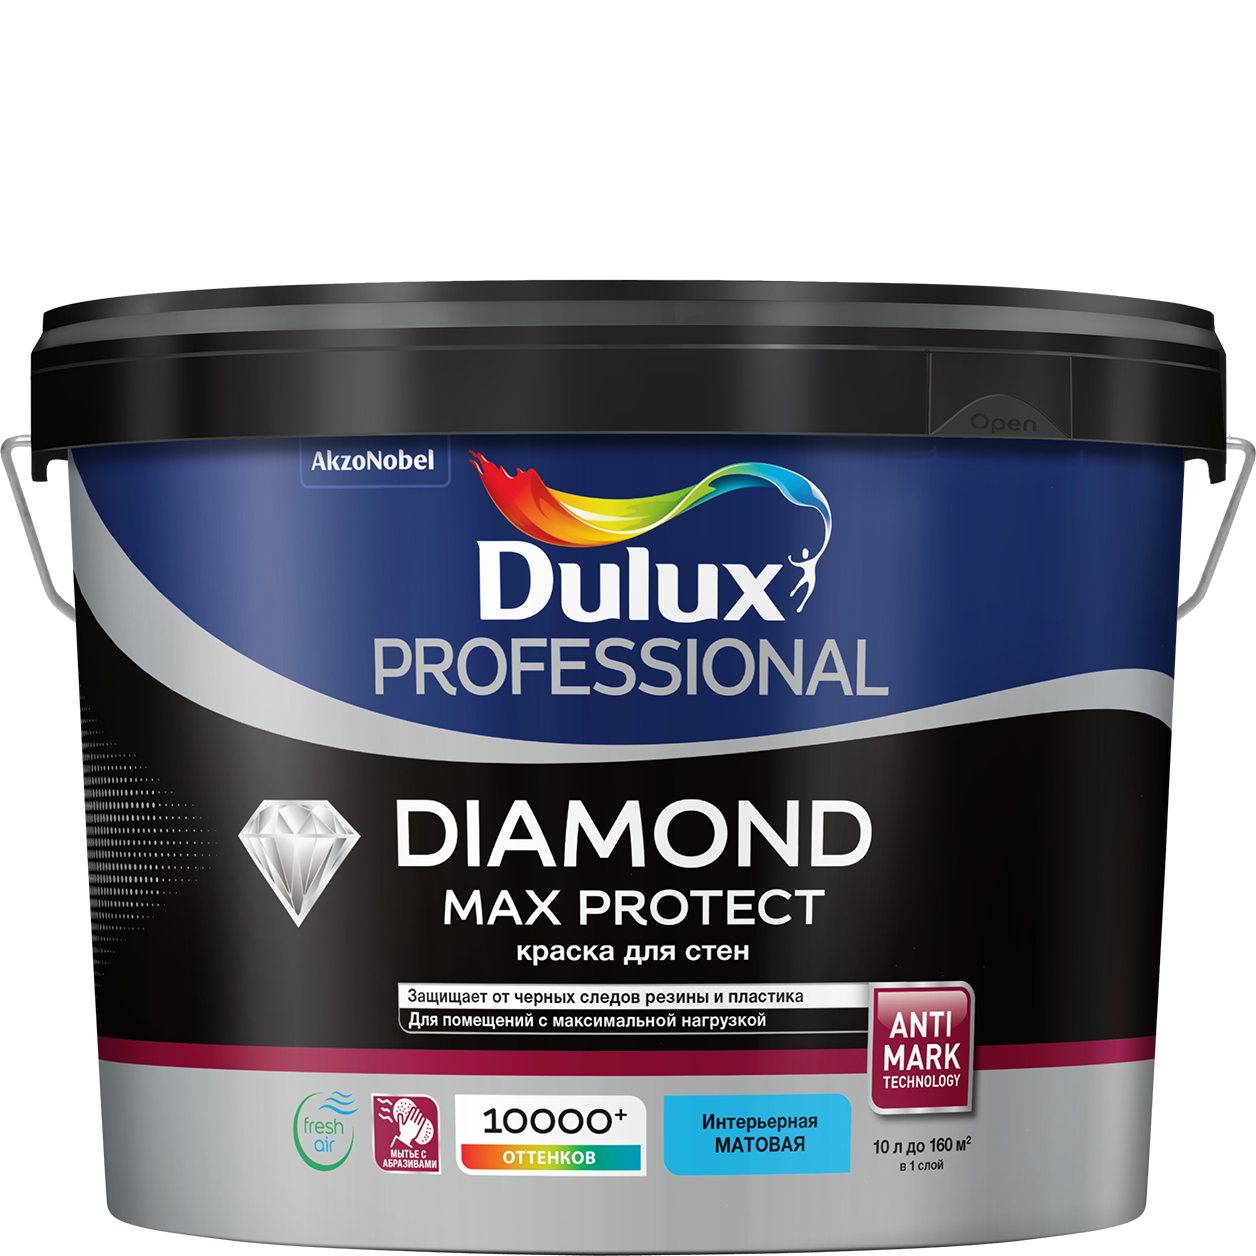 <span style="font-weight: bold;">Dulux Diamond Max Protect 10л</span><br>